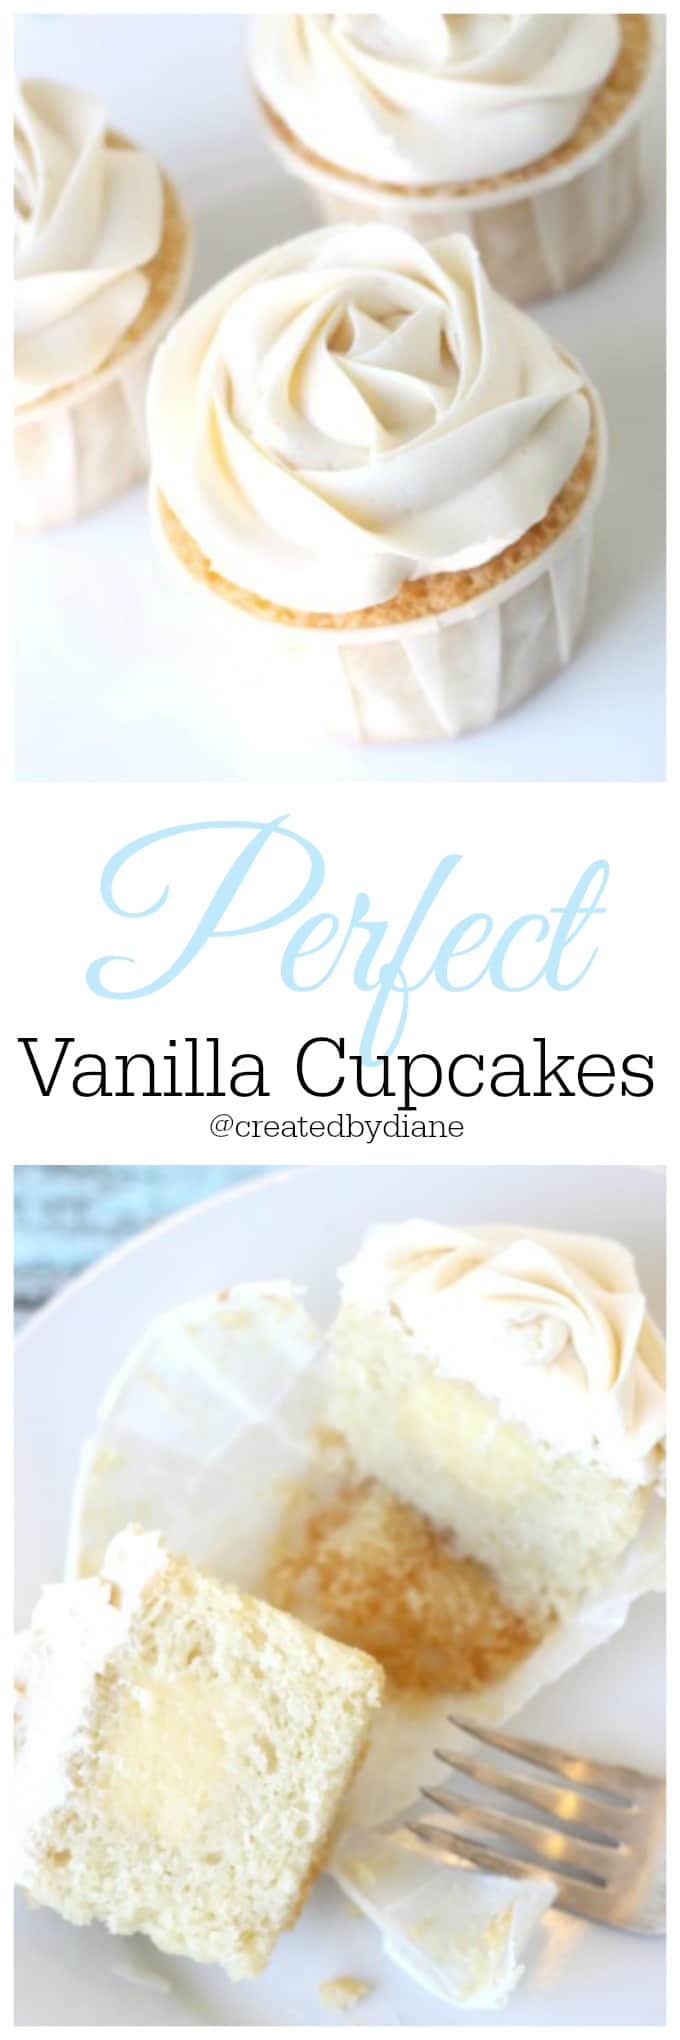 the most perfect vanilla filled cupcakes with Vanilla Italian Buttercream frosting @createdbydiane